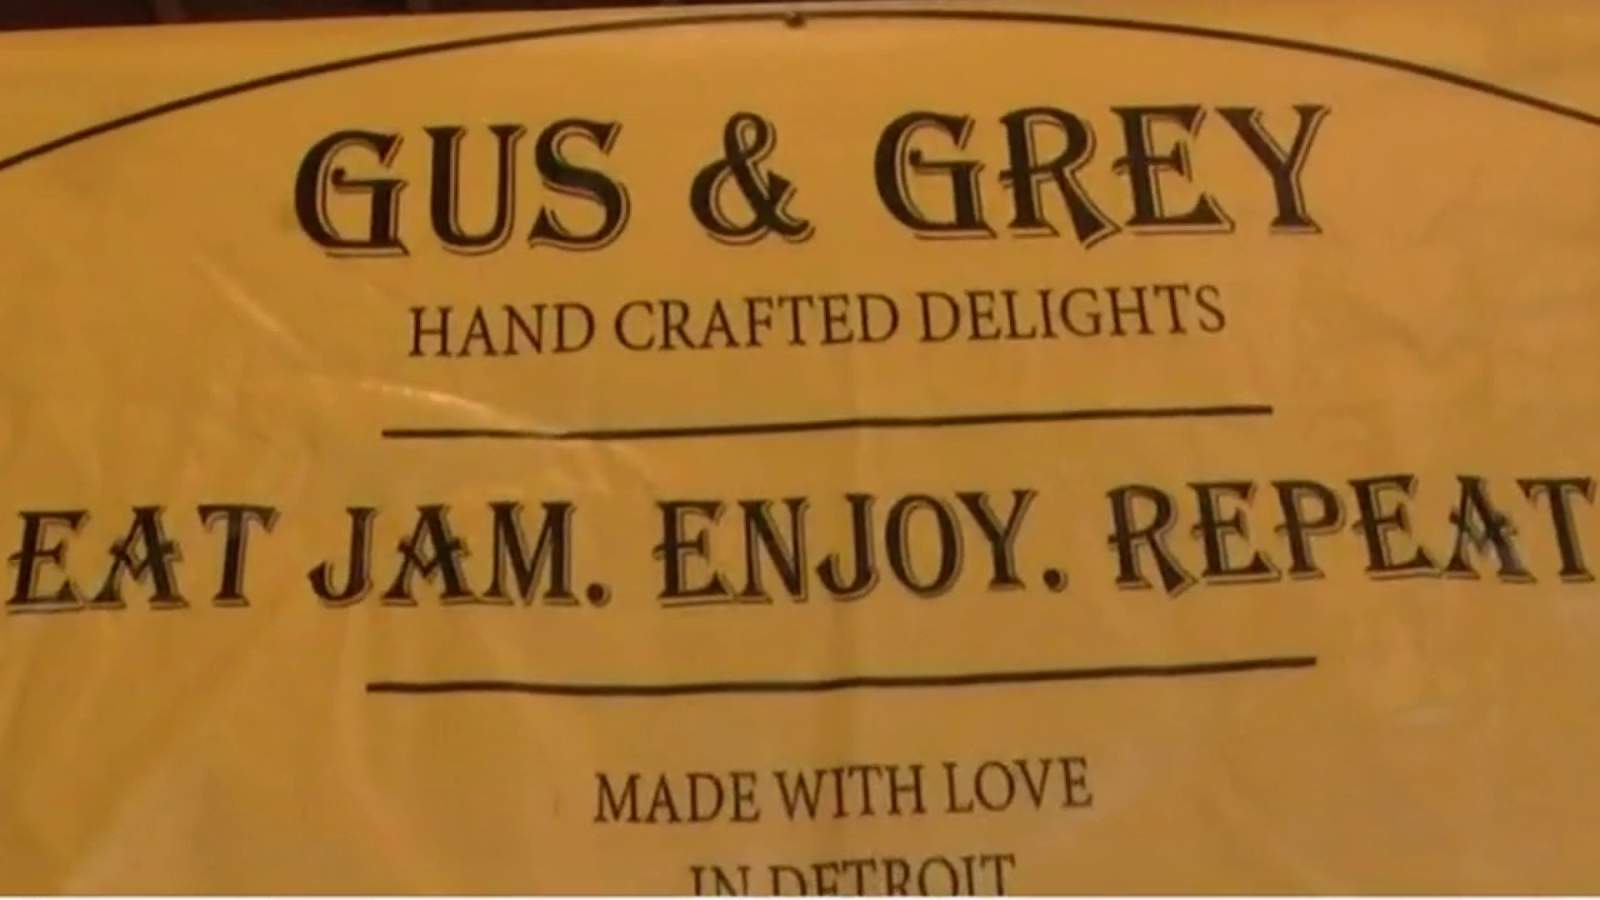 Get sweet jam and personality with Gus & Grey